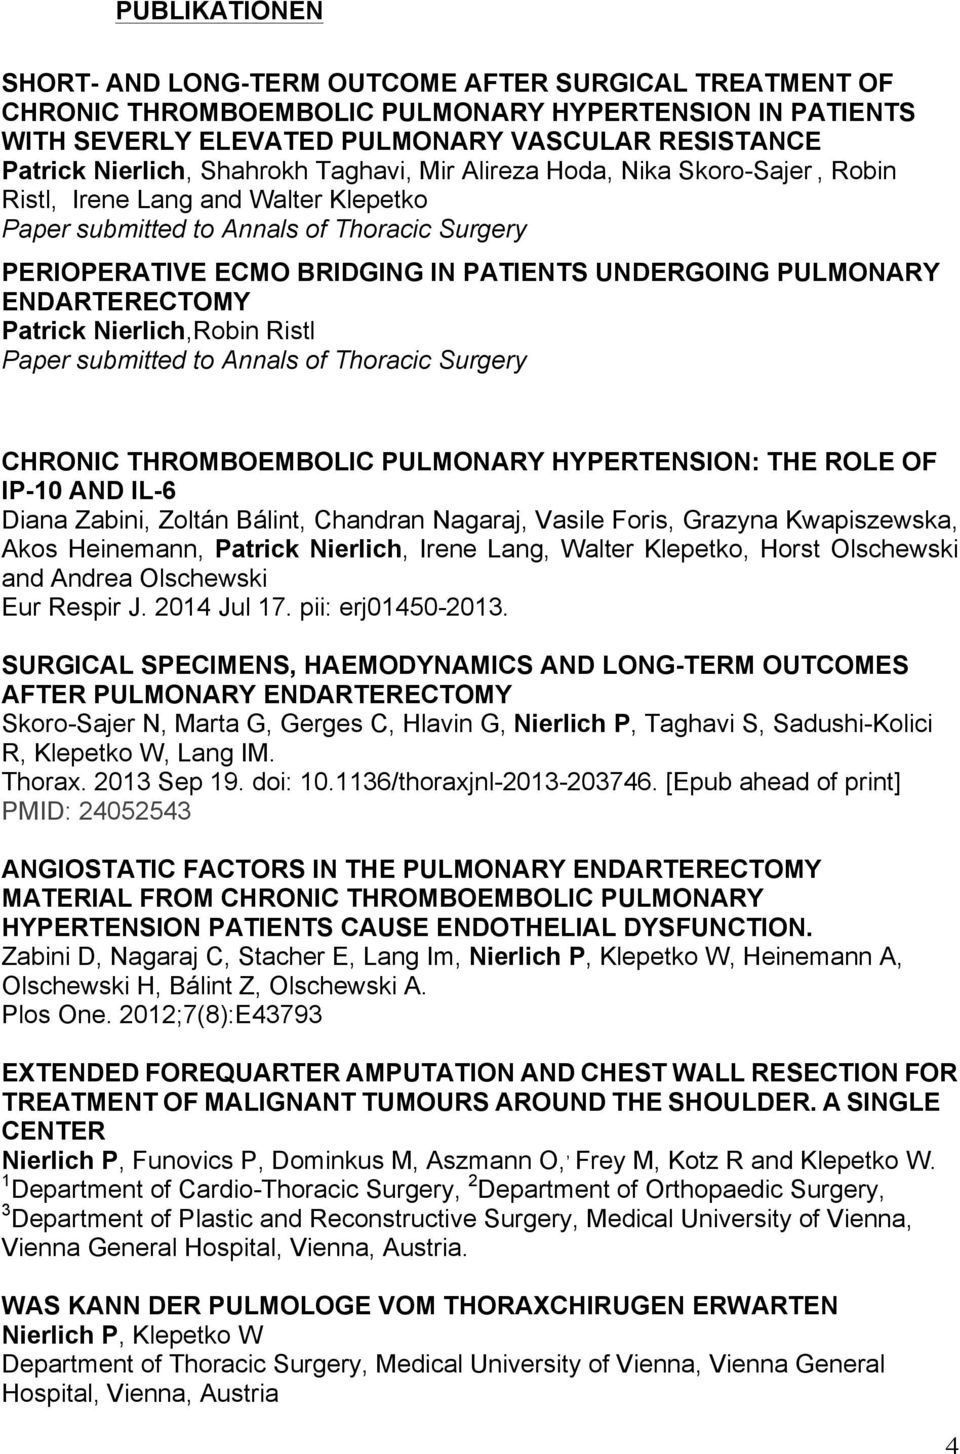 PULMONARY ENDARTERECTOMY Patrick Nierlich,Robin Ristl Paper submitted to Annals of Thoracic Surgery CHRONIC THROMBOEMBOLIC PULMONARY HYPERTENSION: THE ROLE OF IP-10 AND IL-6 Diana Zabini, Zoltán